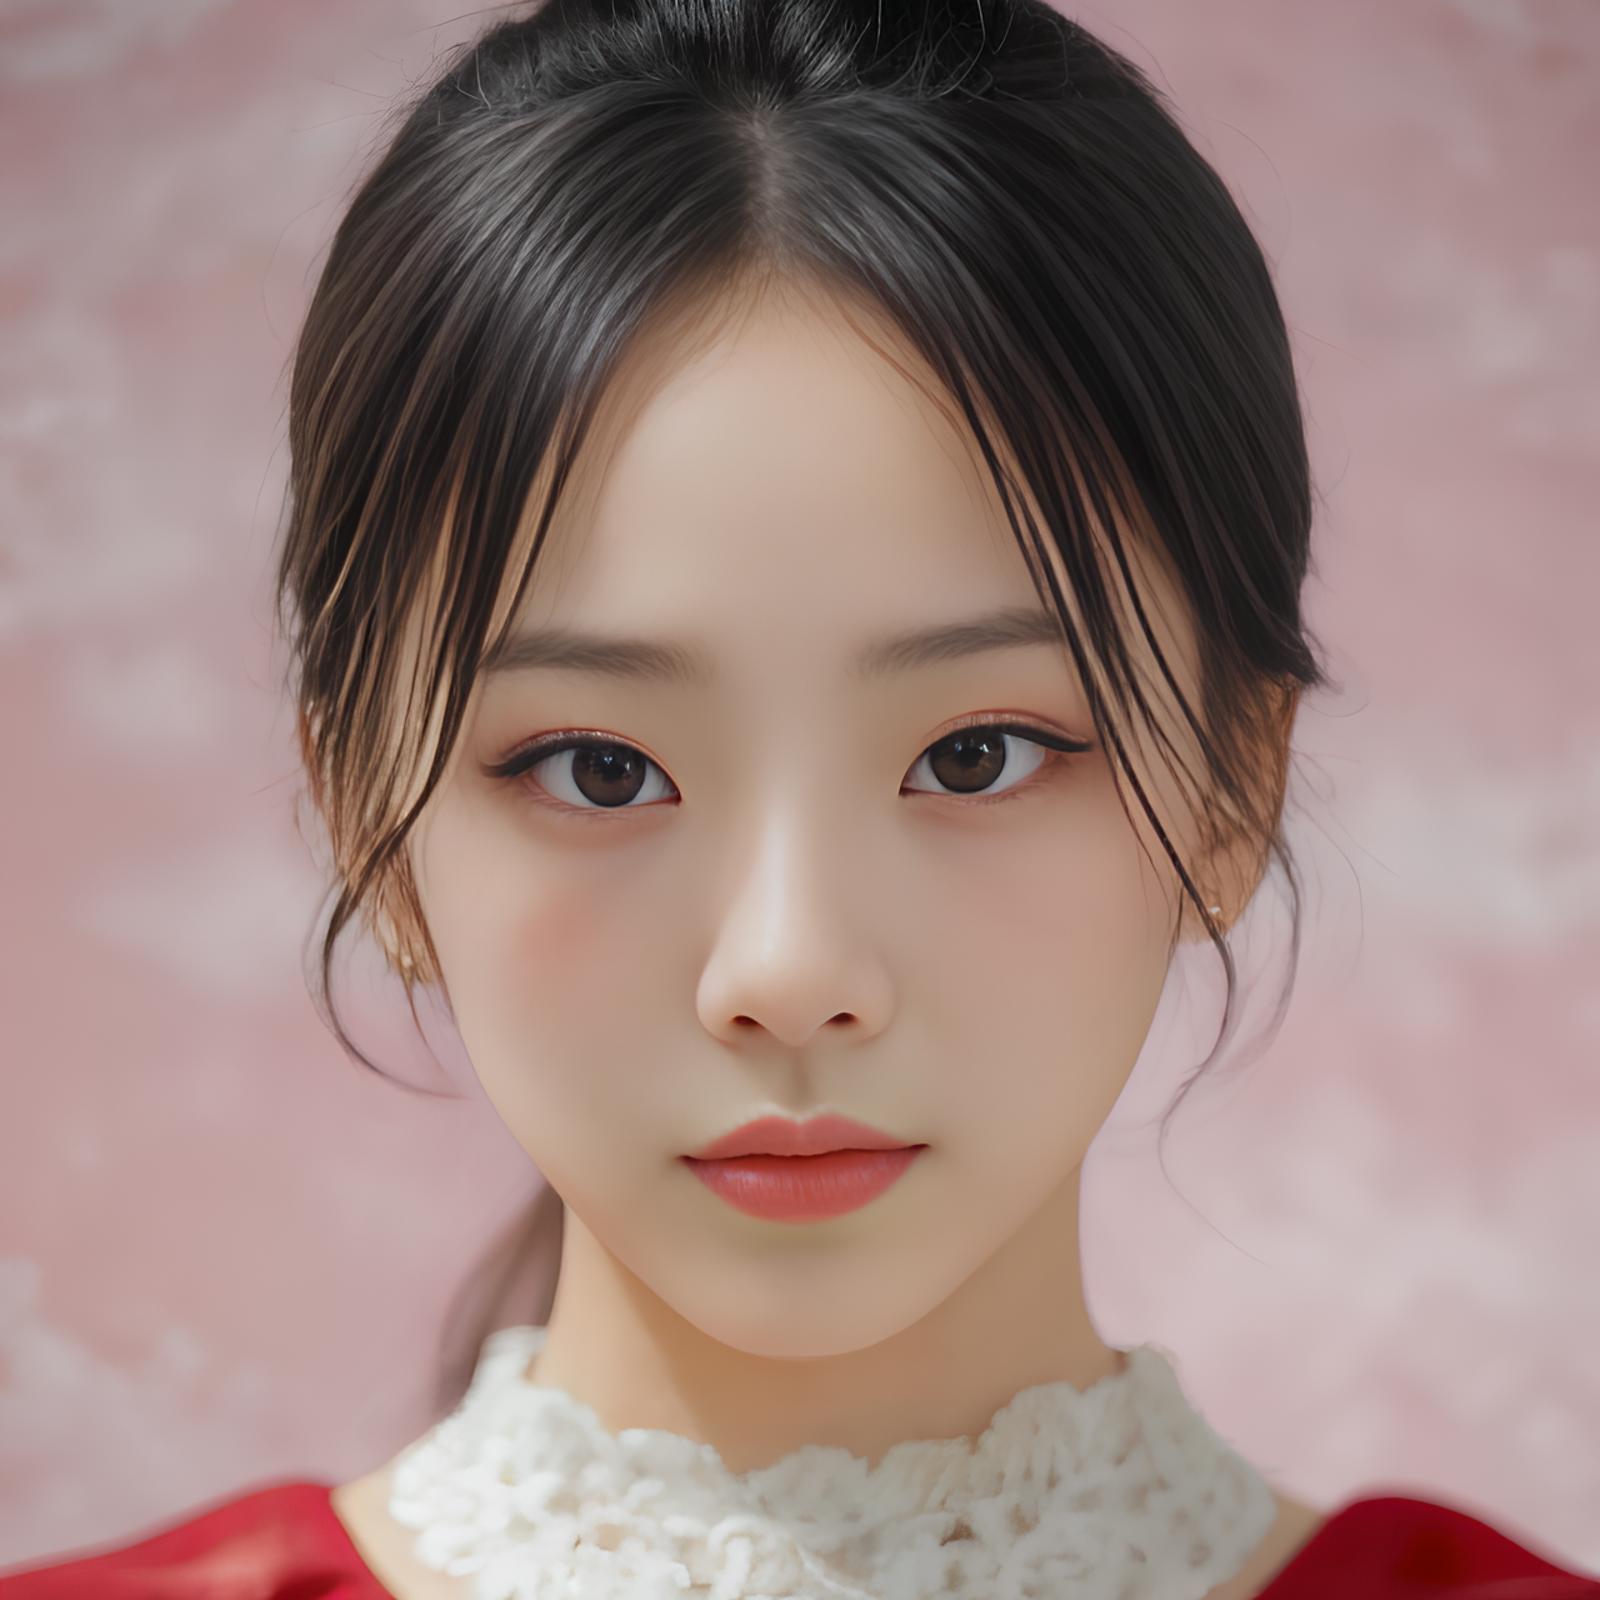 Not Loona - Vivi image by Tissue_AI